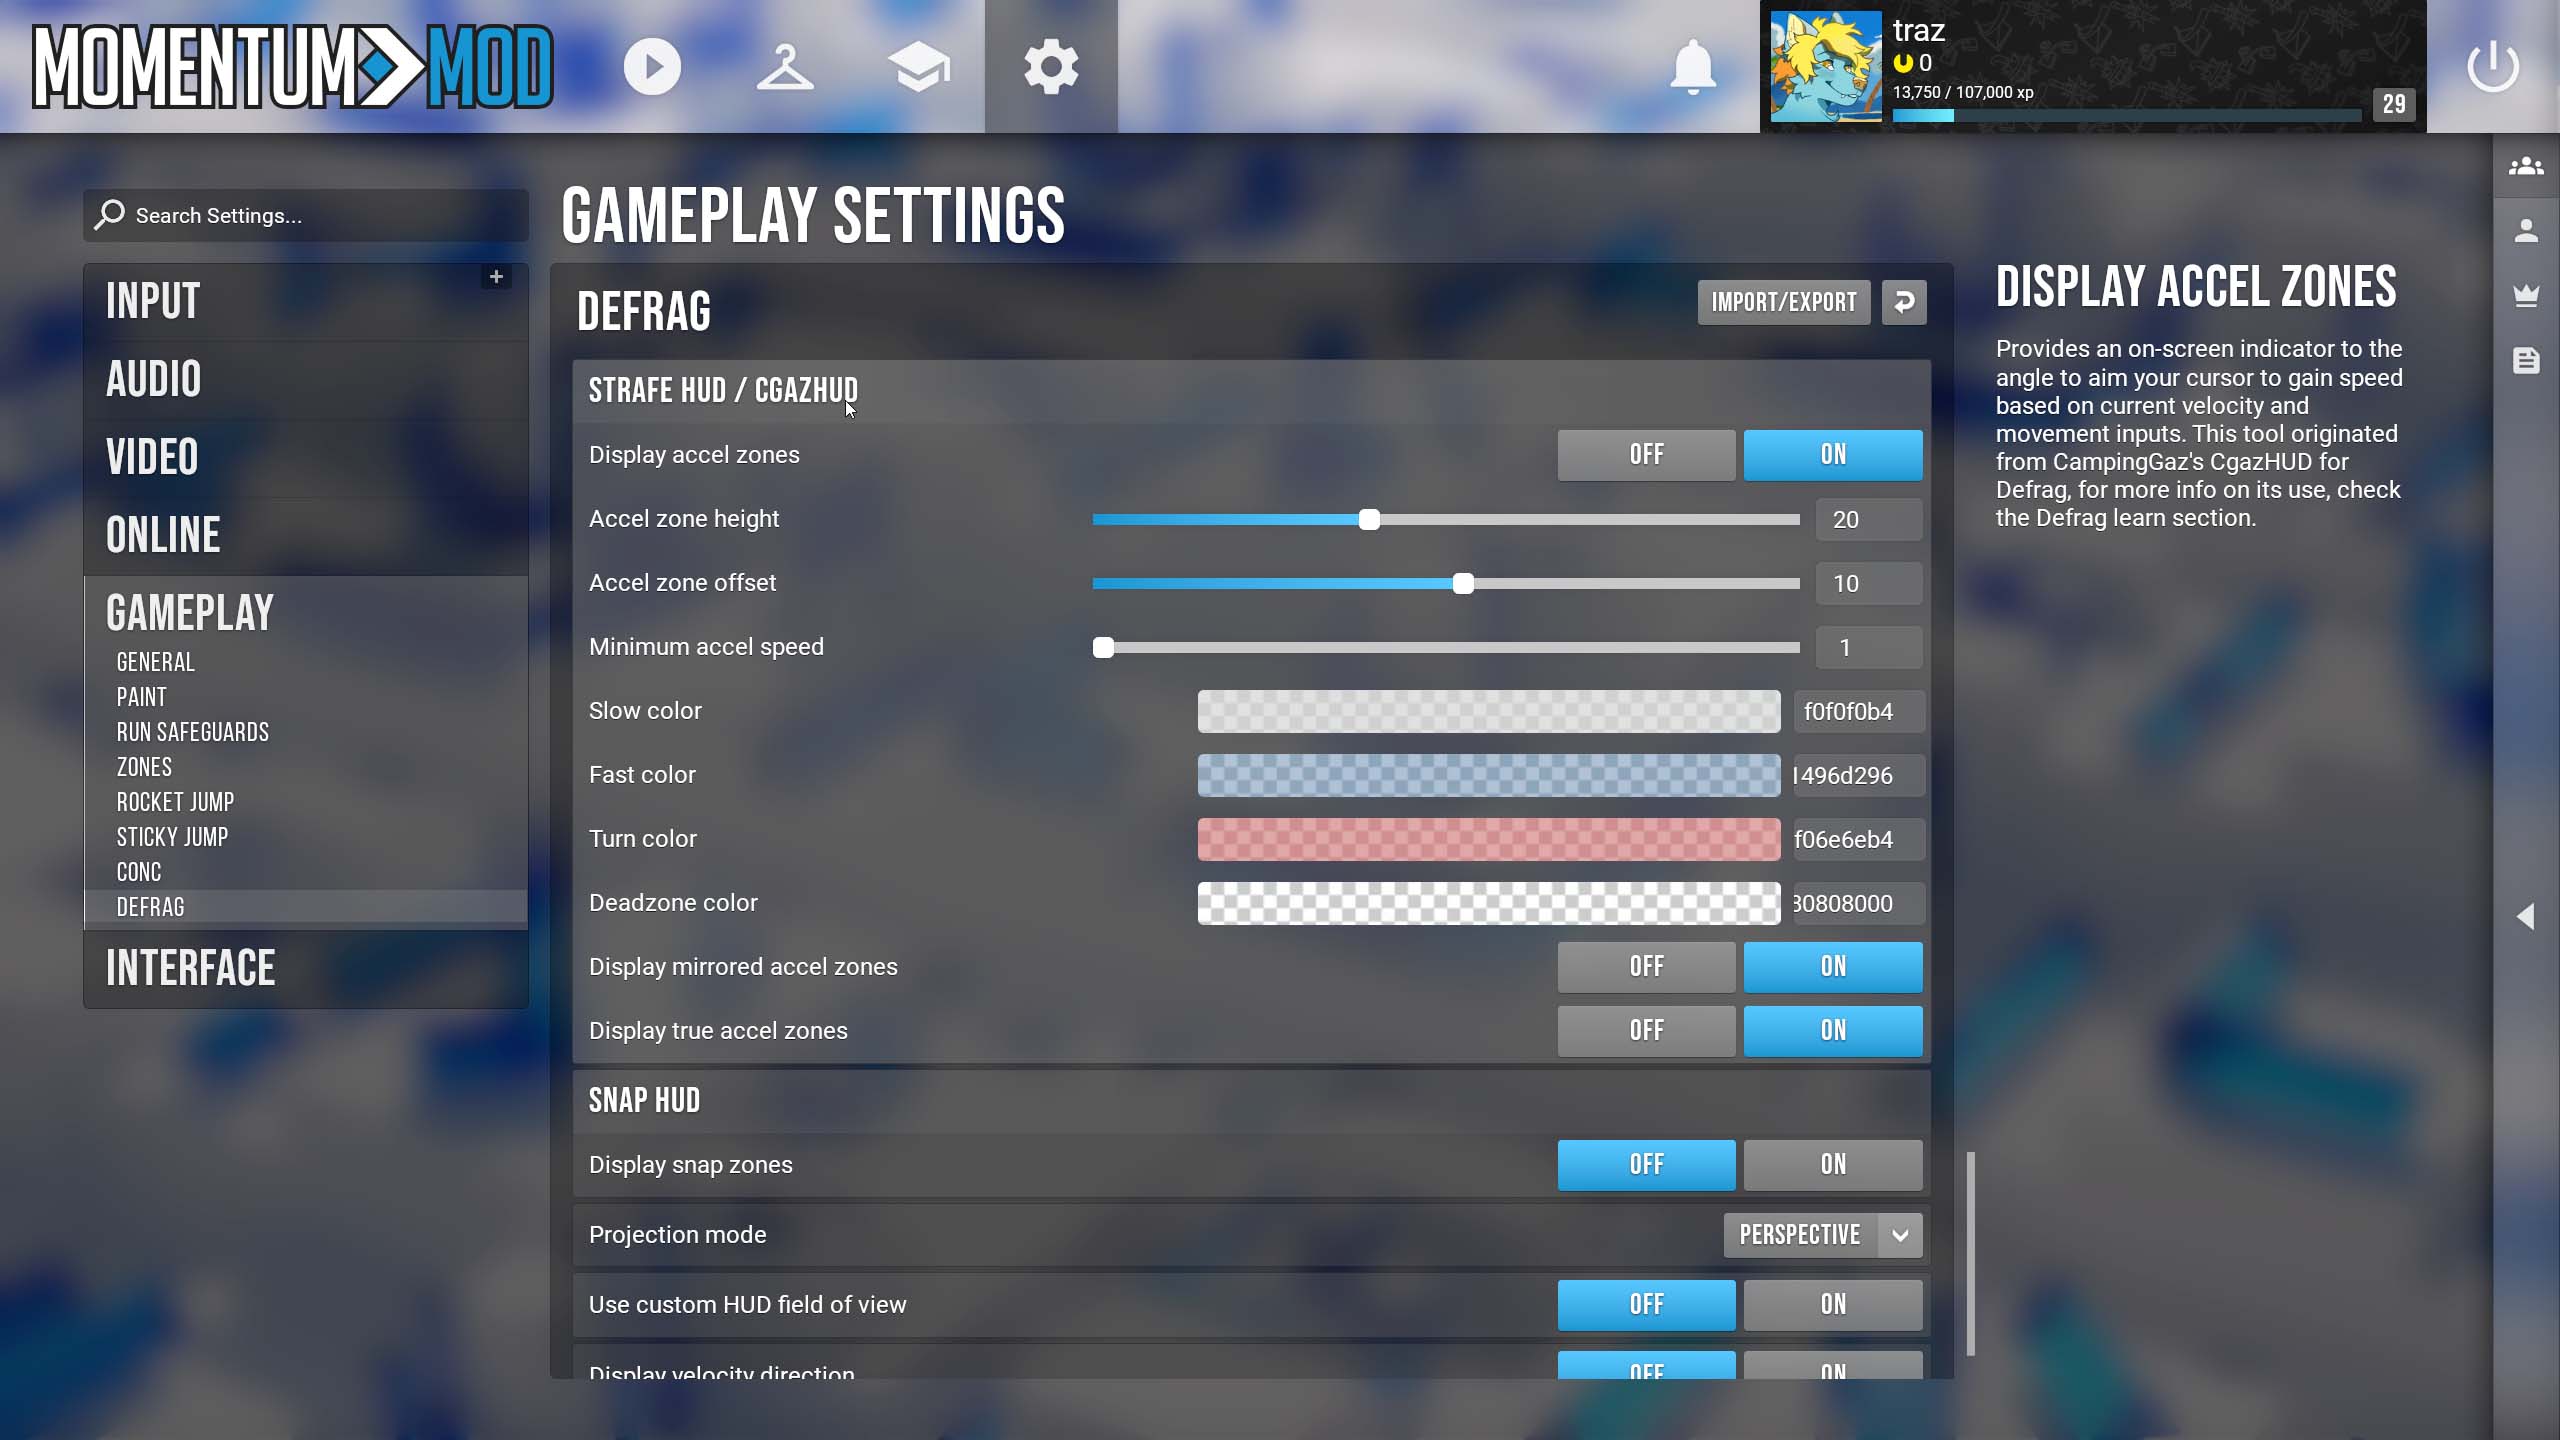 Momentum Mod's new in-game UI displaying the settings